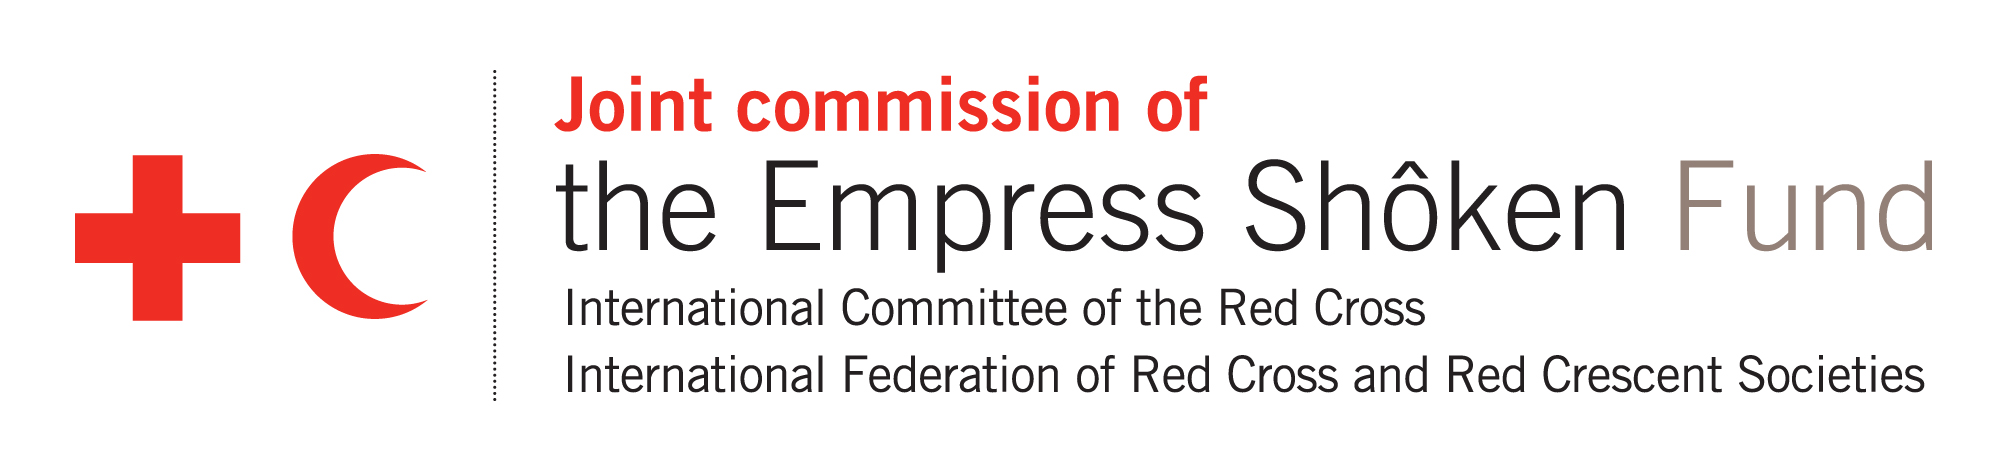 Logo of the Joint commission of the Empress Shoken Fund